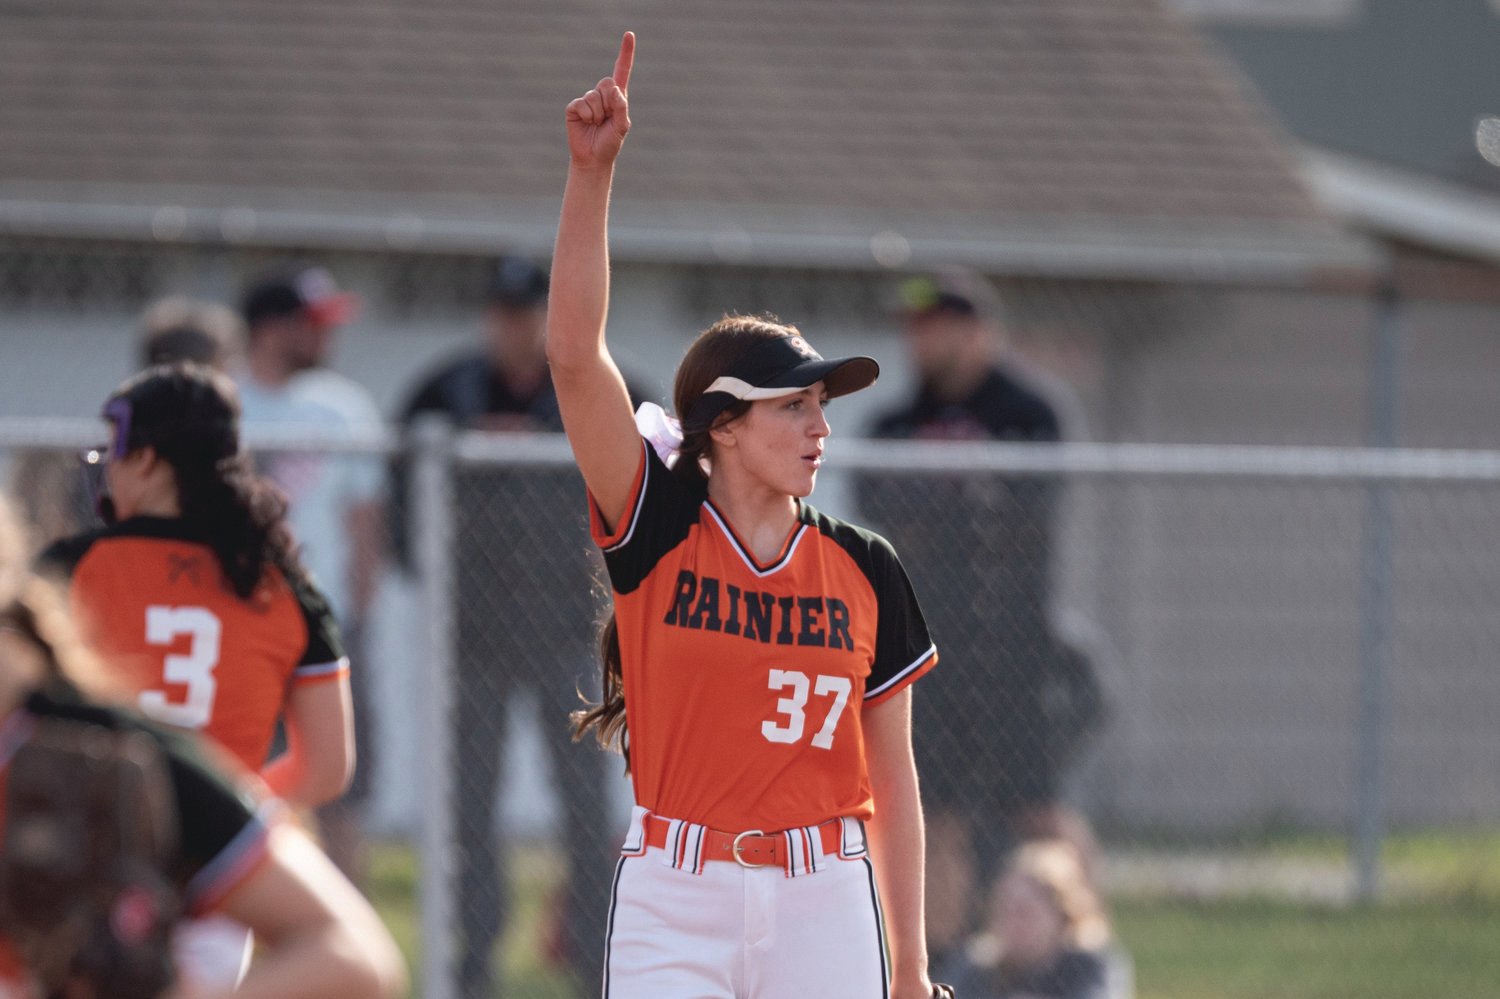 Rainier pitcher Bailey Elwell raises a finger after getting an out against Tenino March 24.